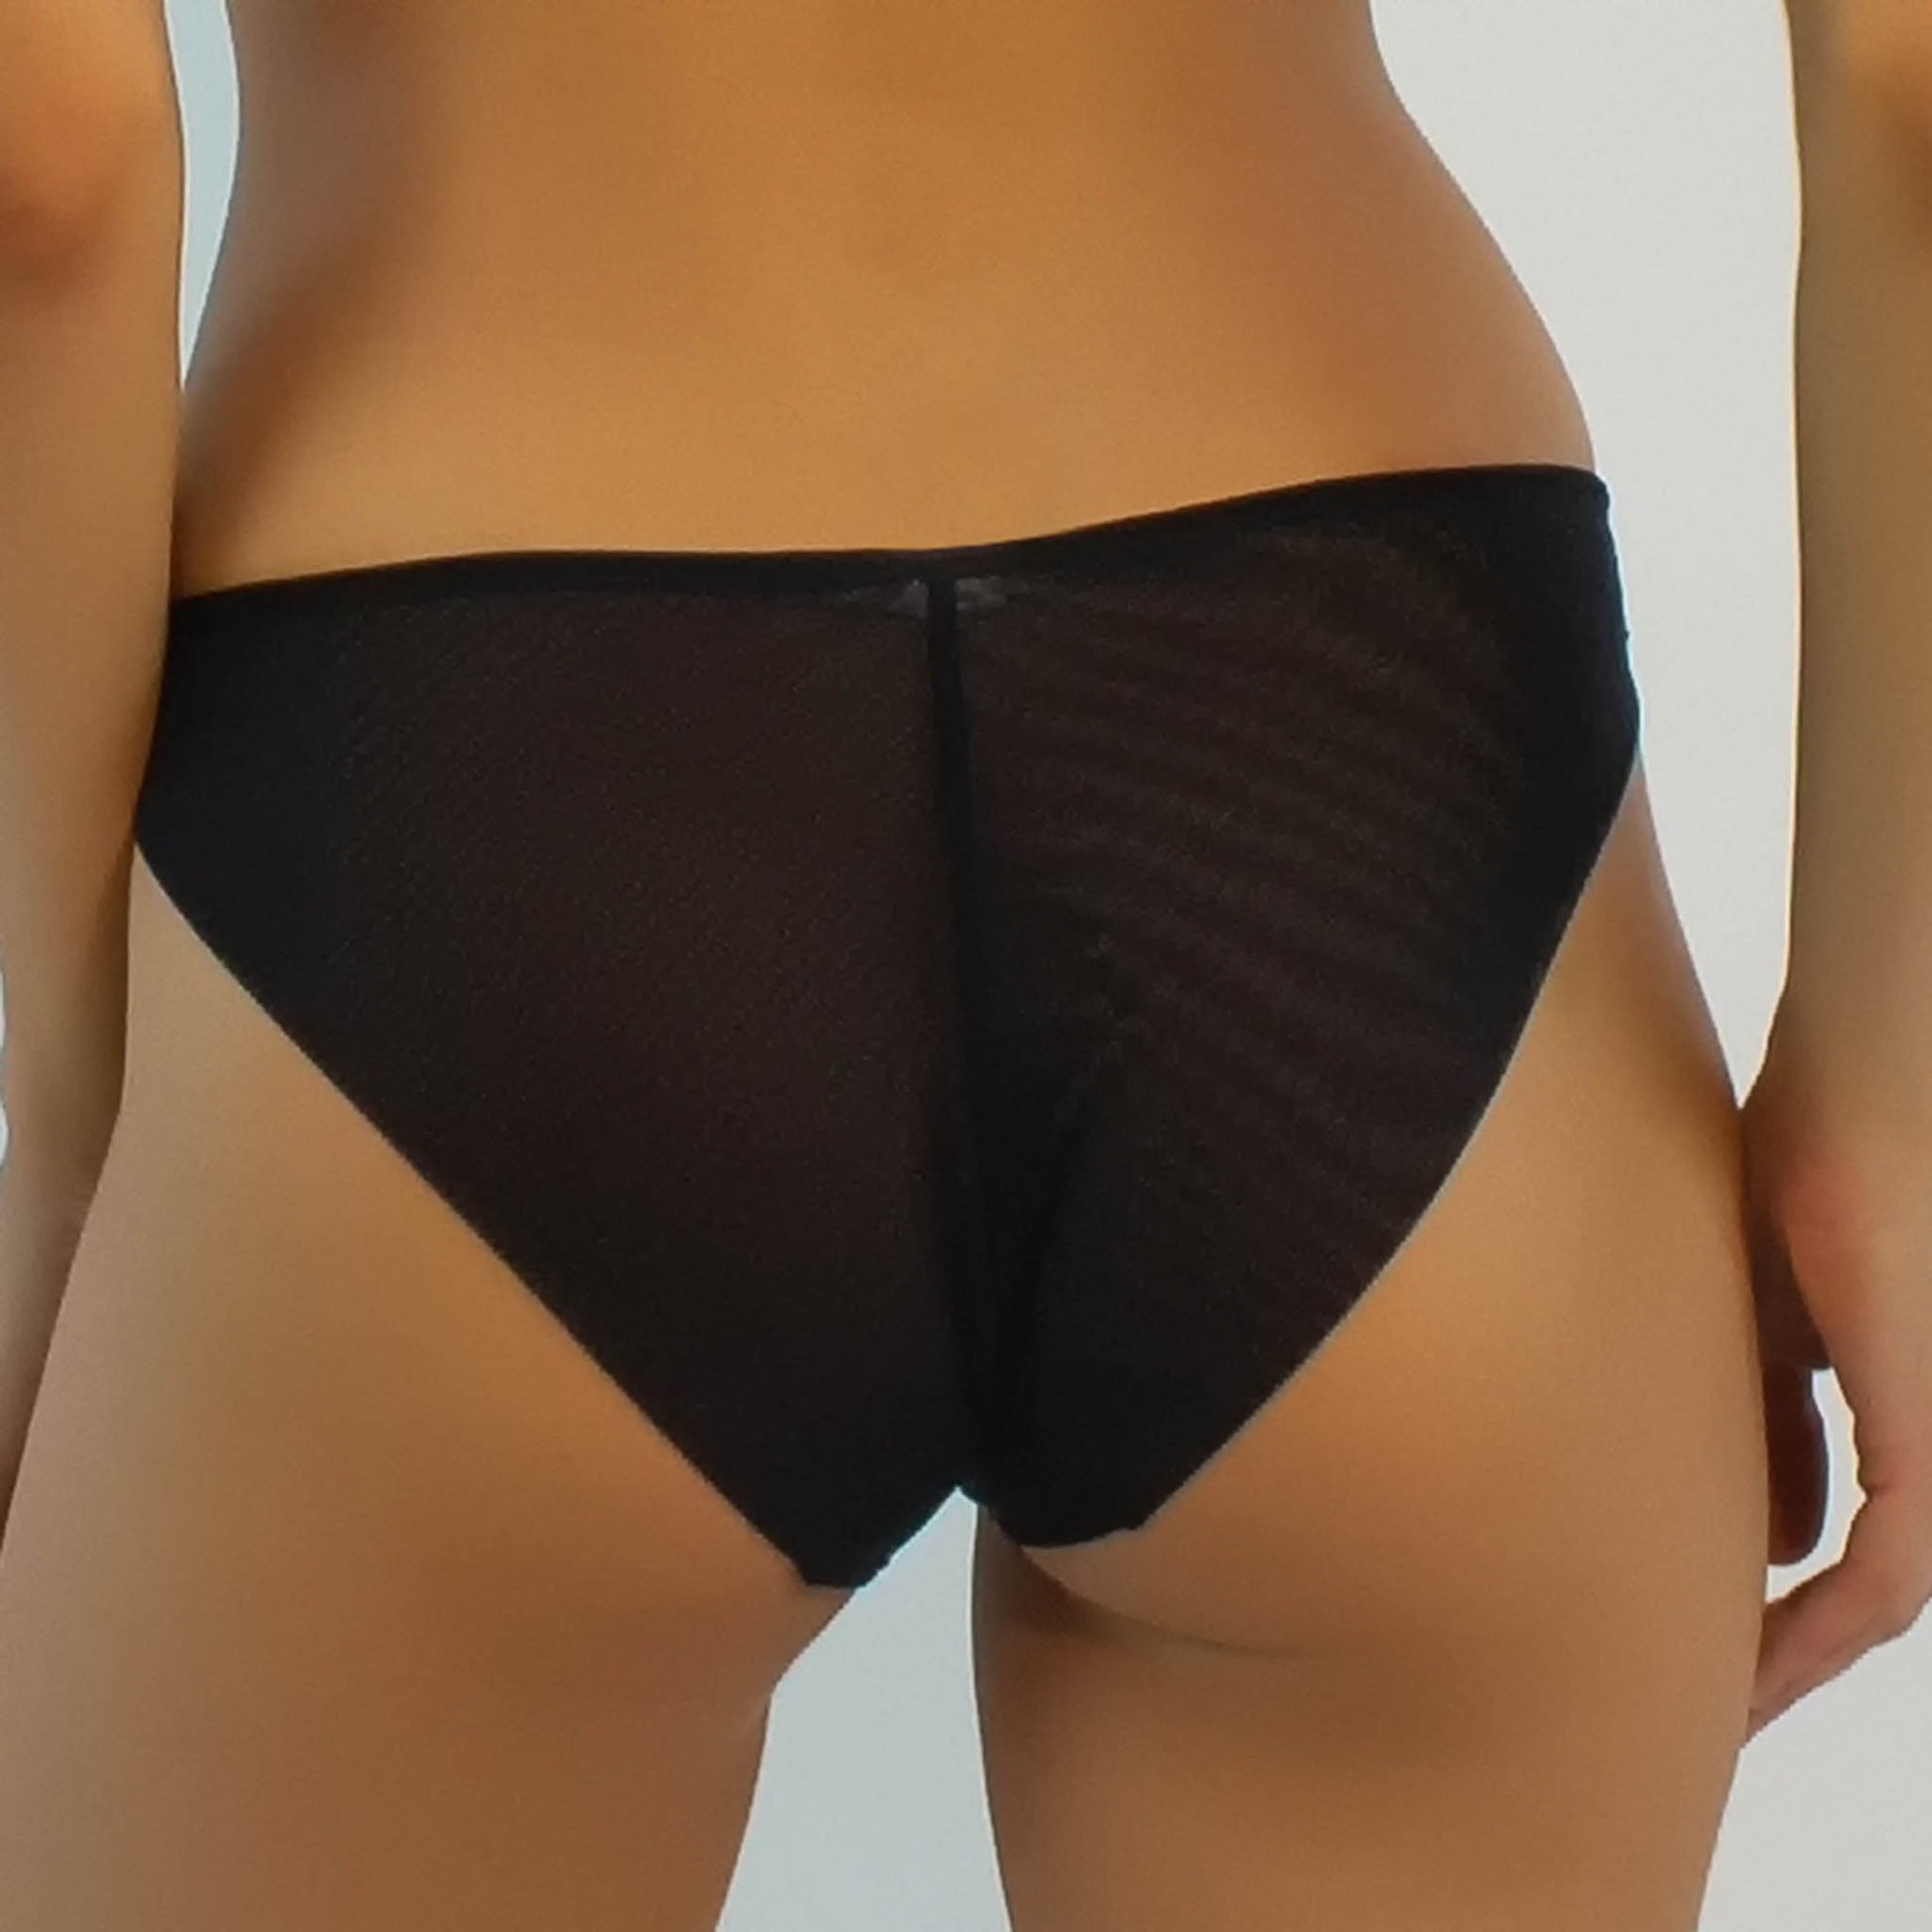 The Crossing Lines black bikini is designed from soft Italian tulle. Back close-up view